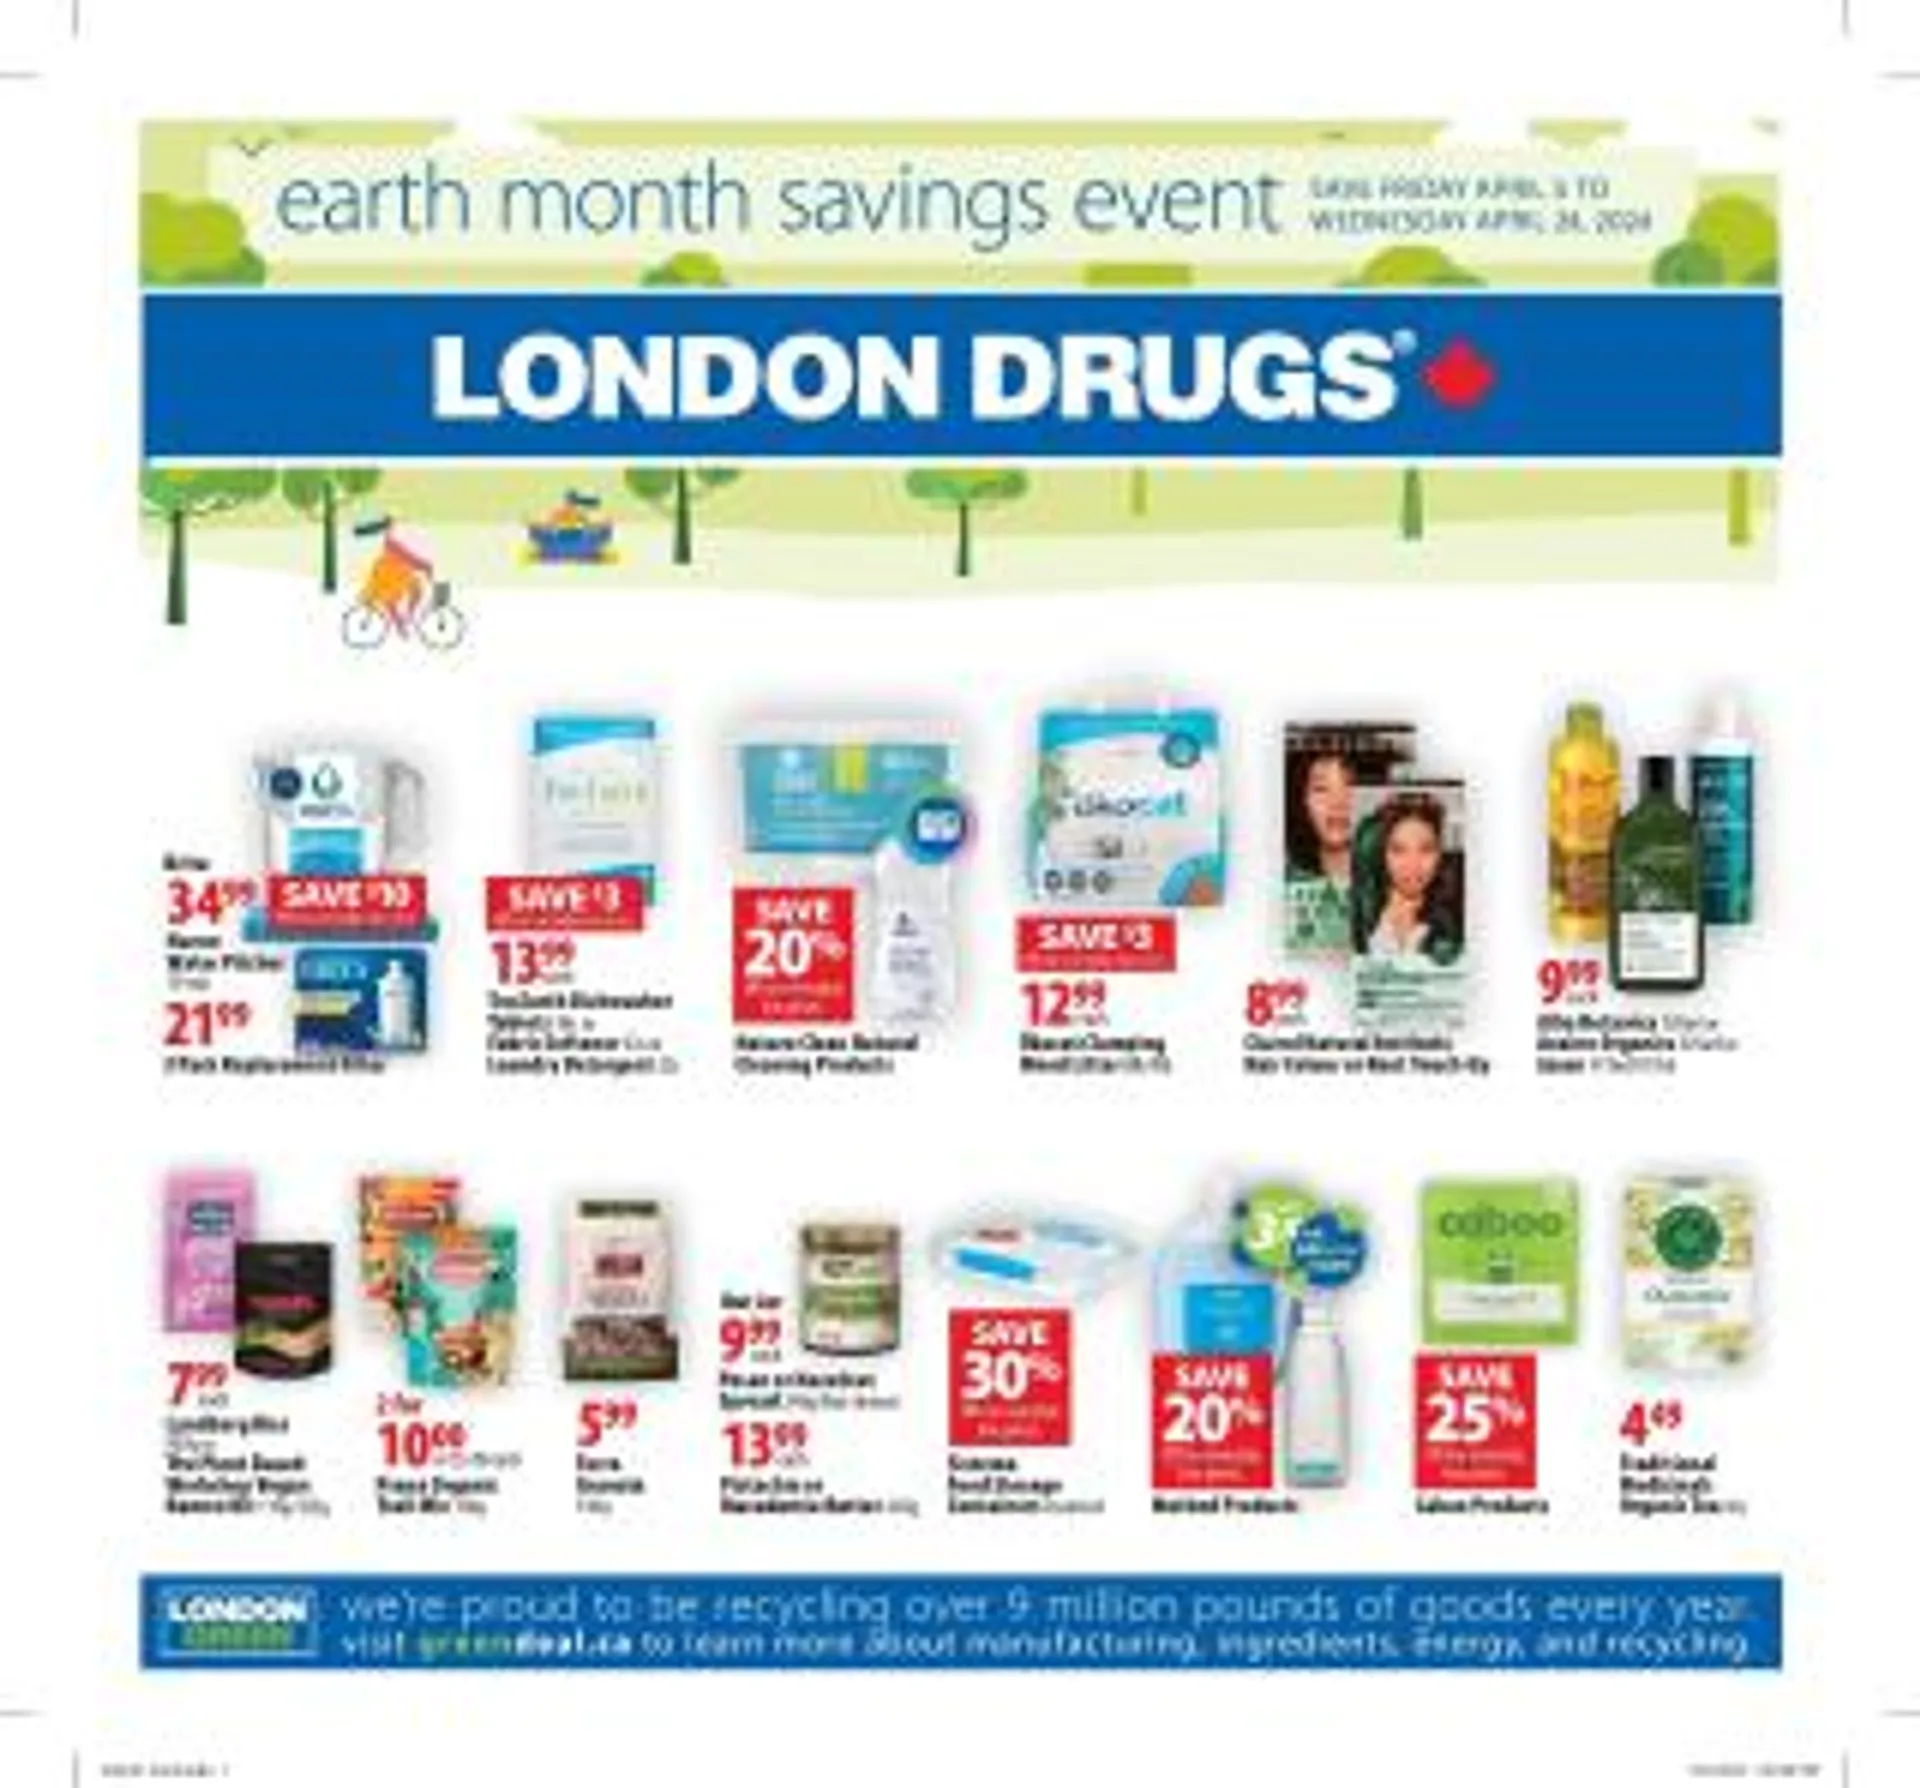 London Drugs Flyer - Earth Month Event - 1